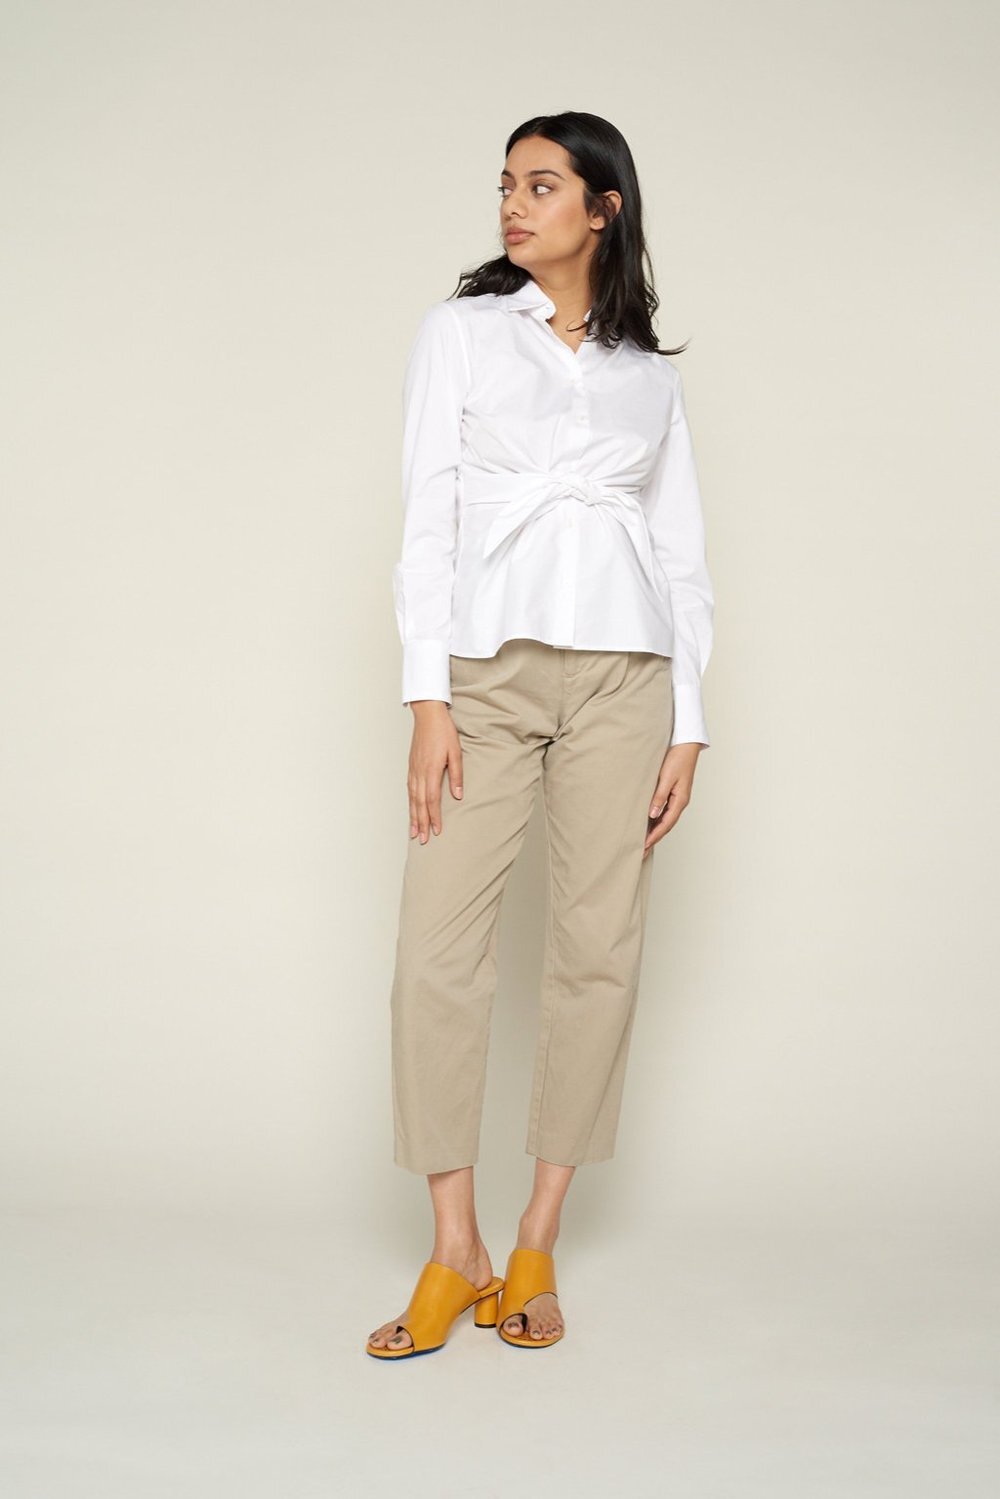 8 Brands with Elegant, Sustainable White Shirts and Blouses for your ...